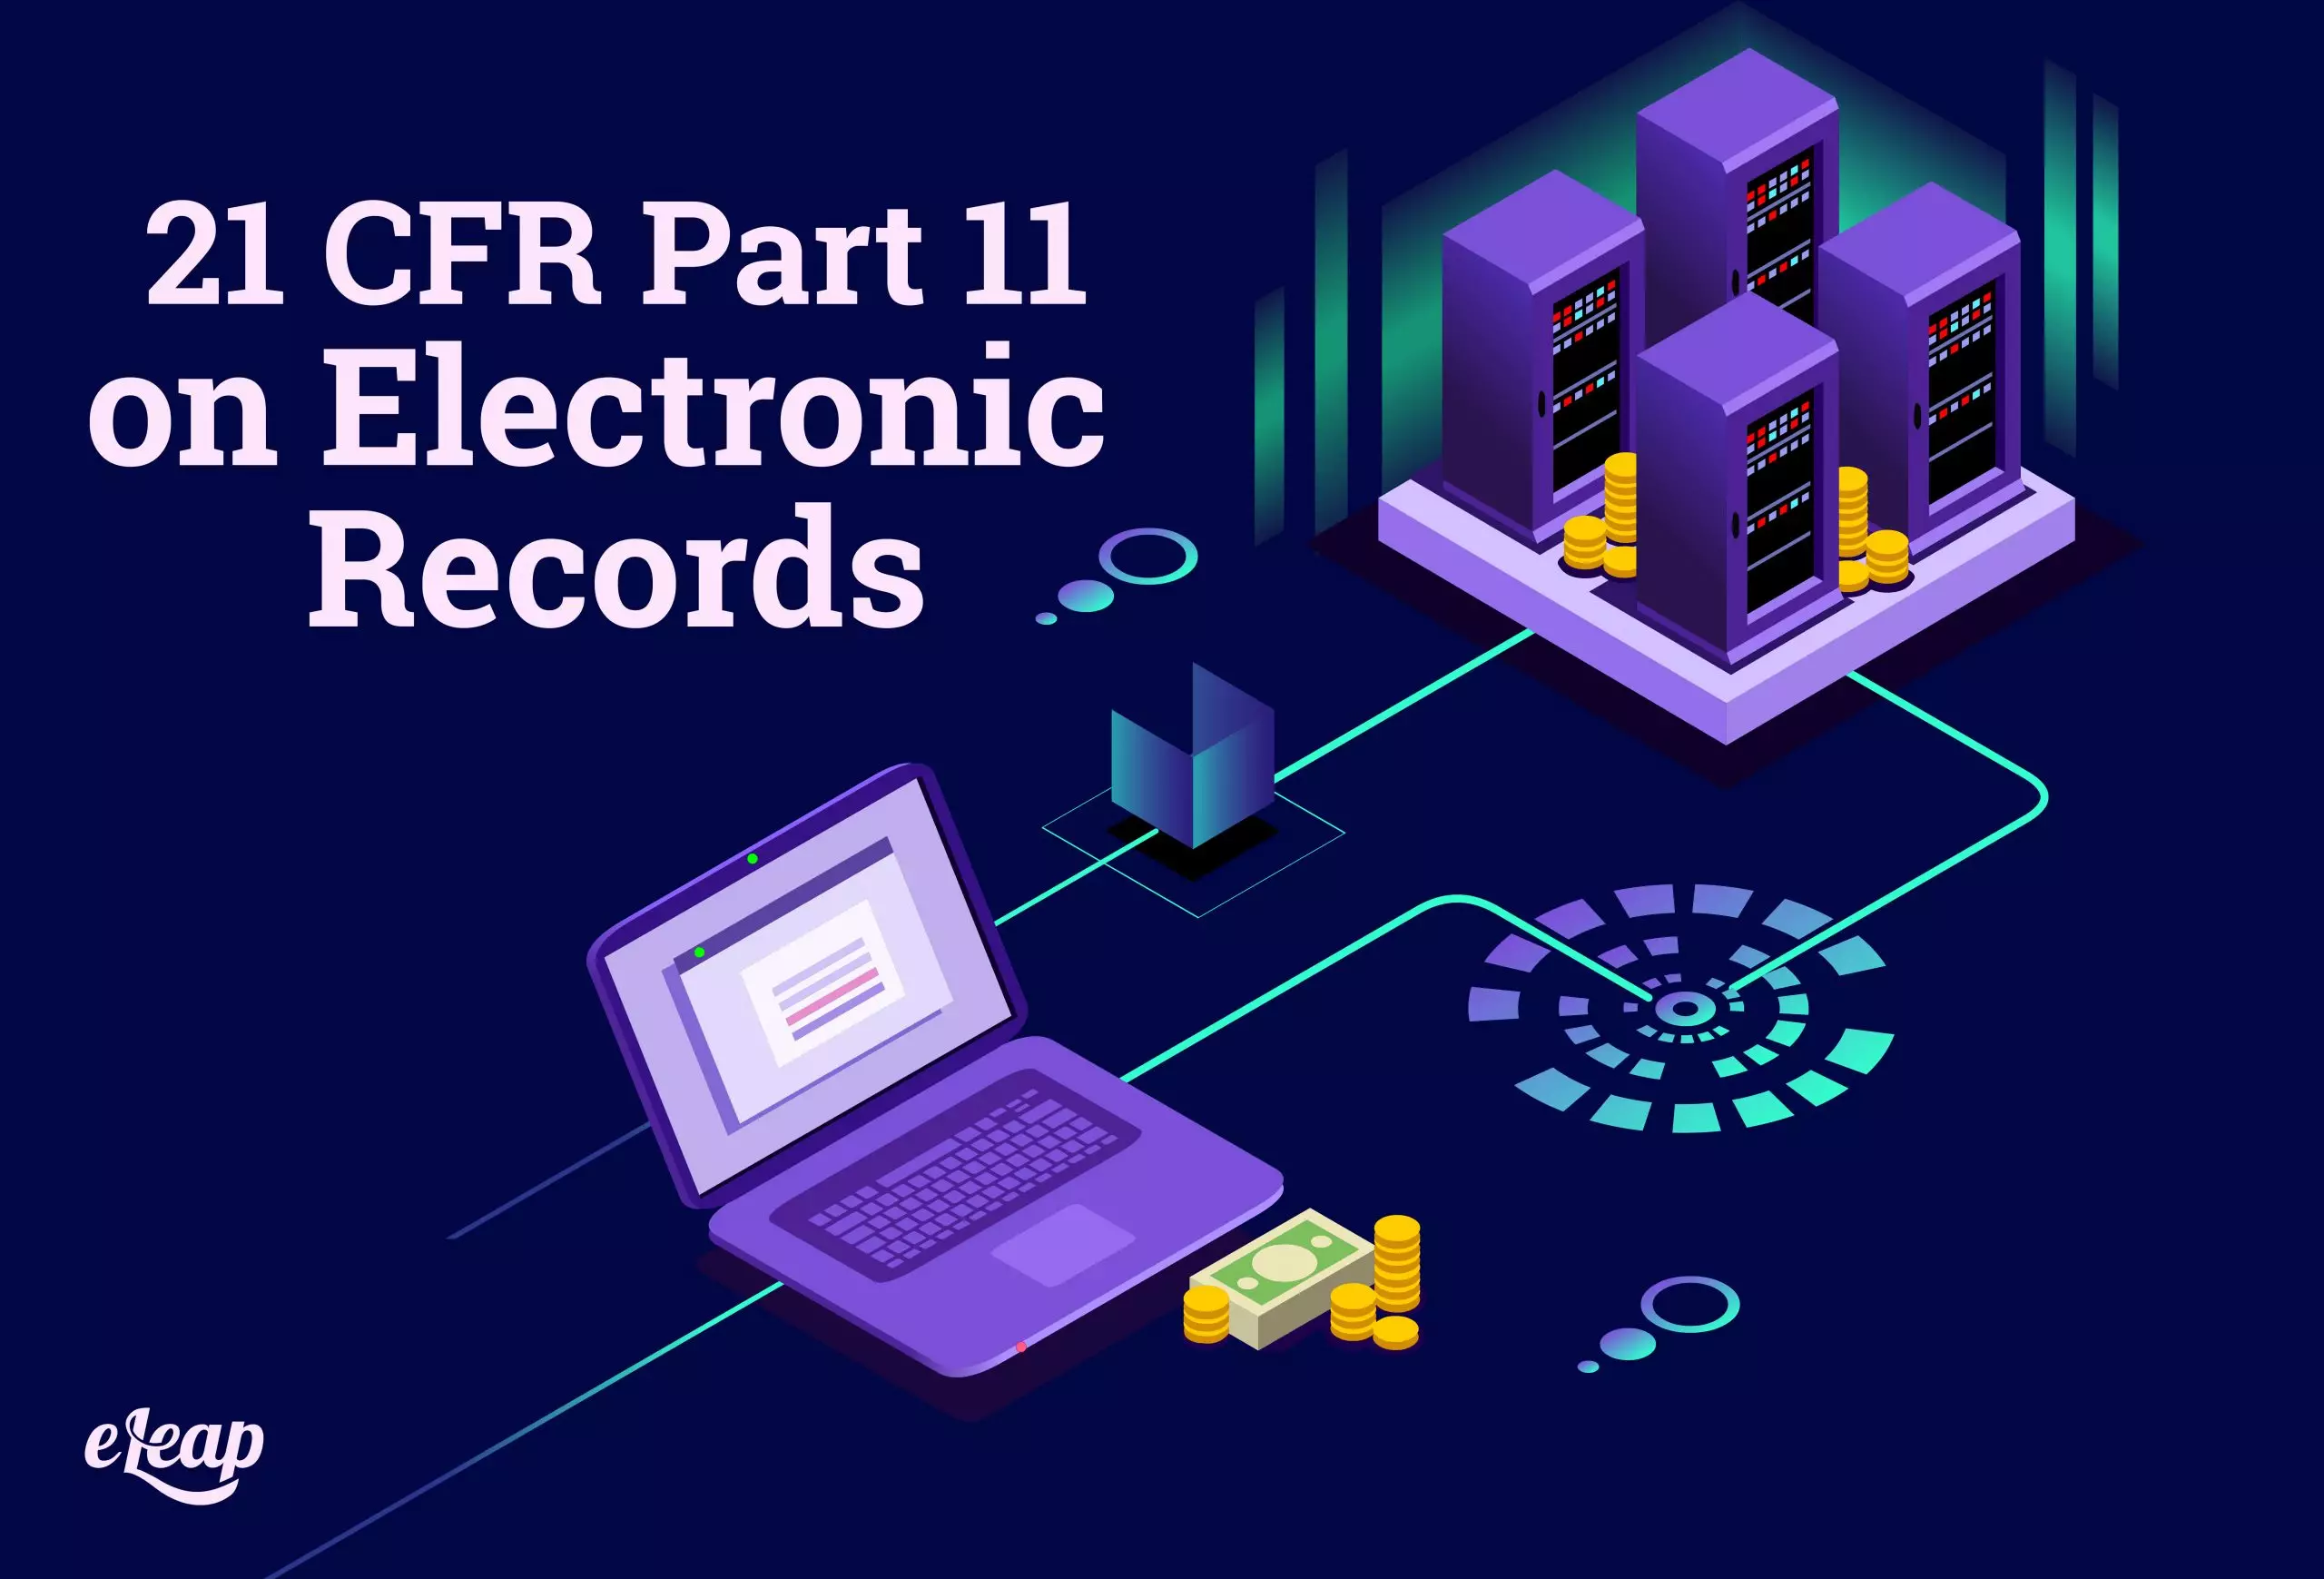 21 CFR Part 11 on Electronic Records